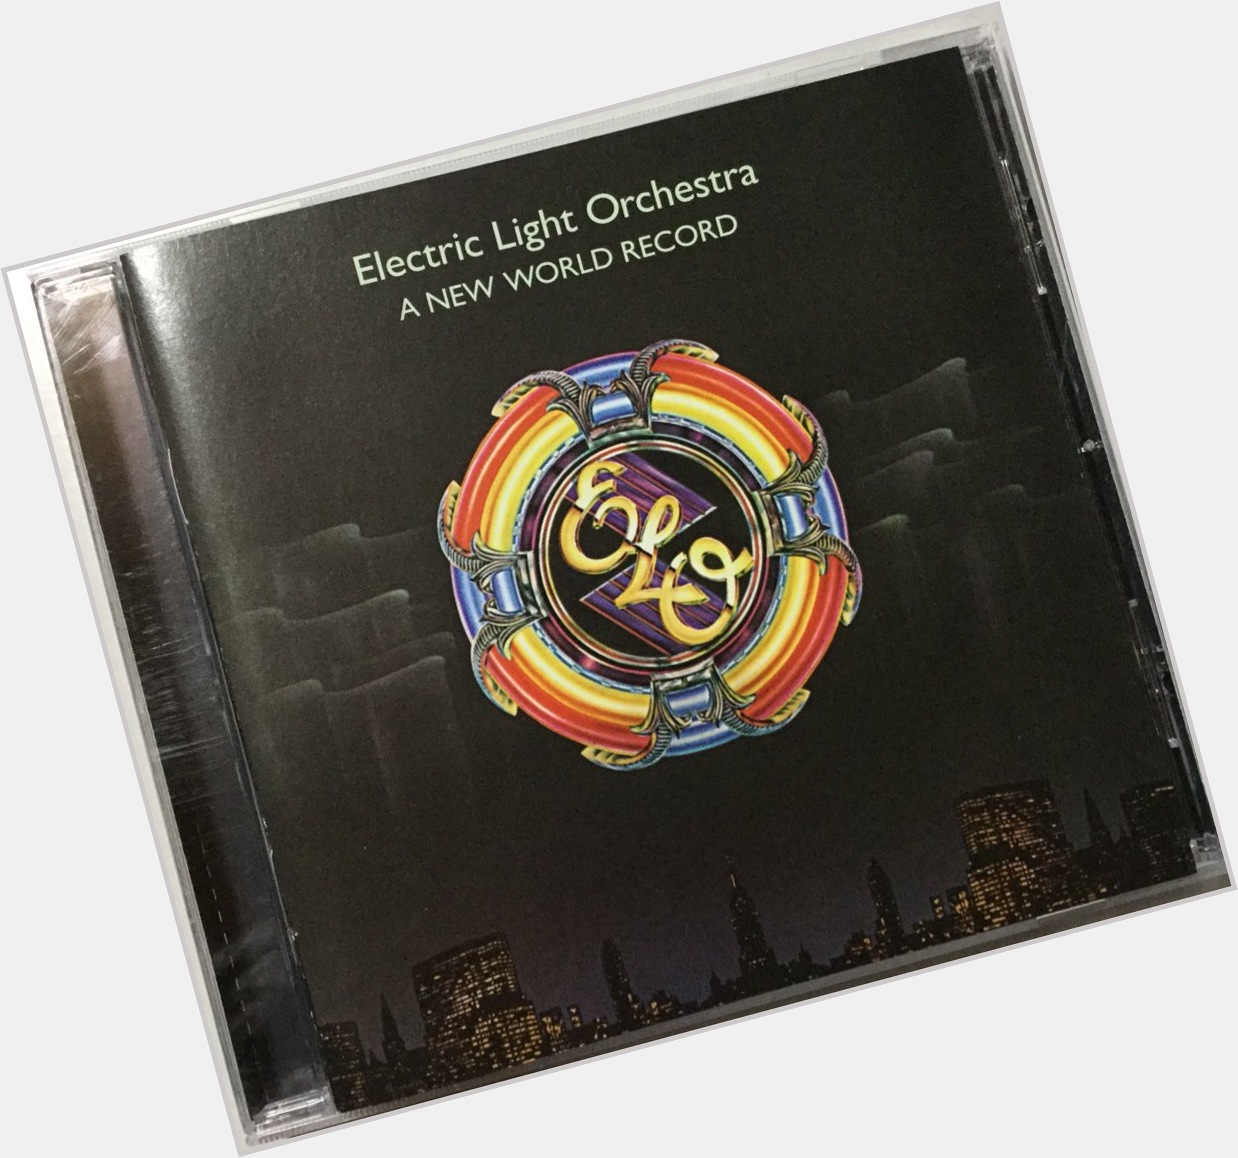 Happy Birthday Jeff Lynne

Electric Light Orchestra / A New World Record 